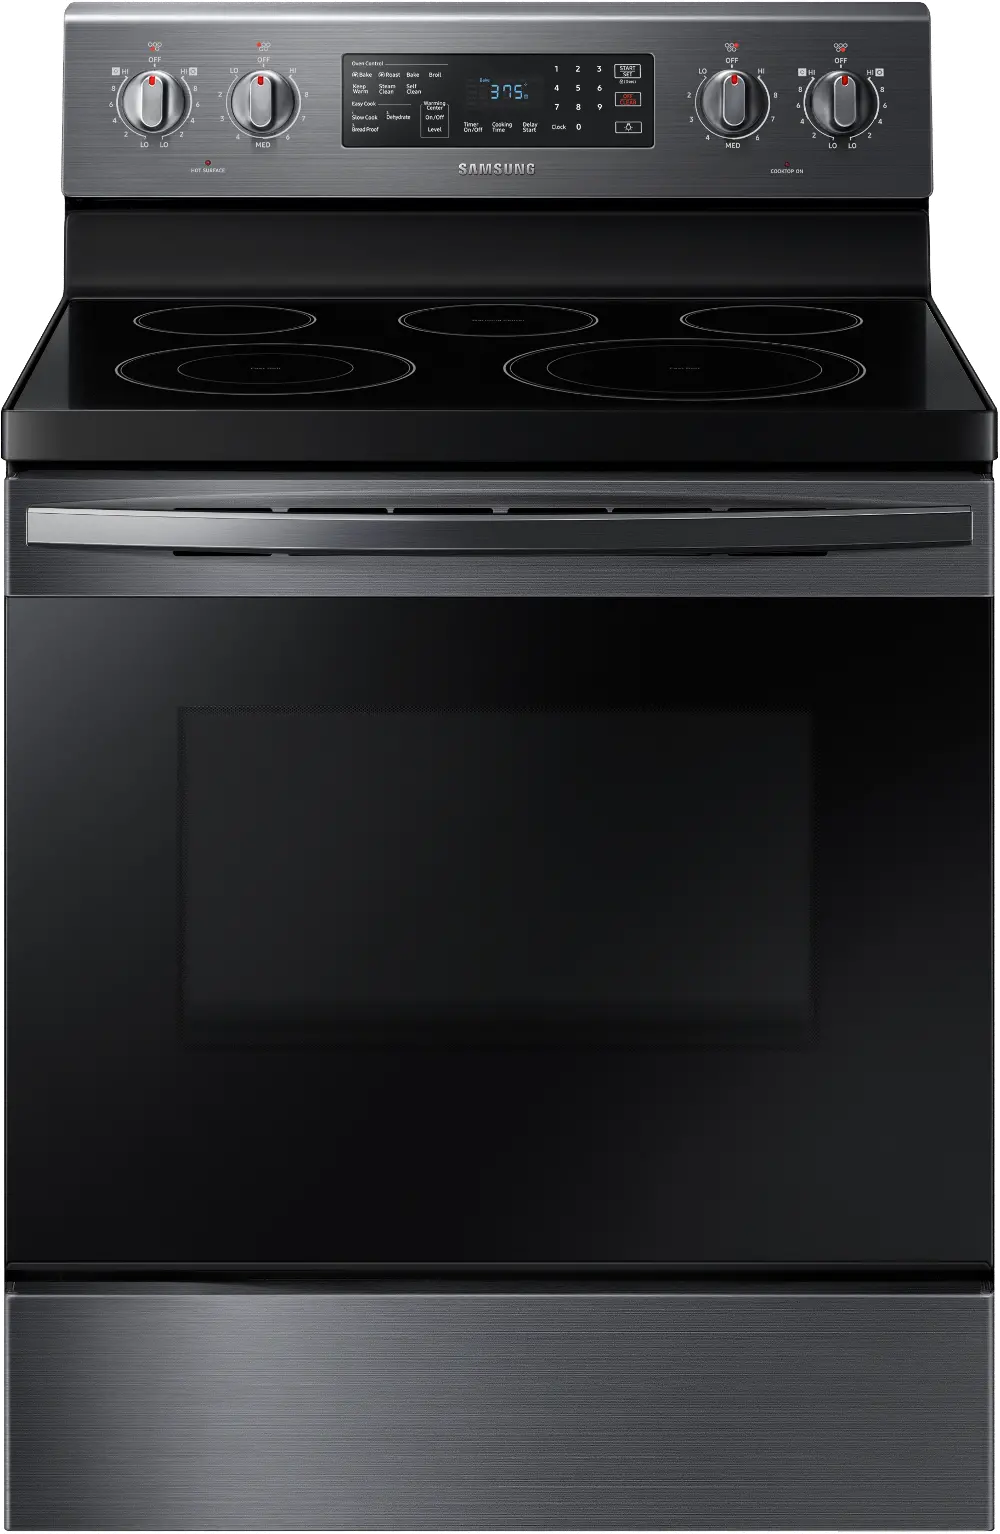 NE59R4321SG Samsung 30 Inch Electric Convection Range - 5.9 cu. ft. Black Stainless Steel-1